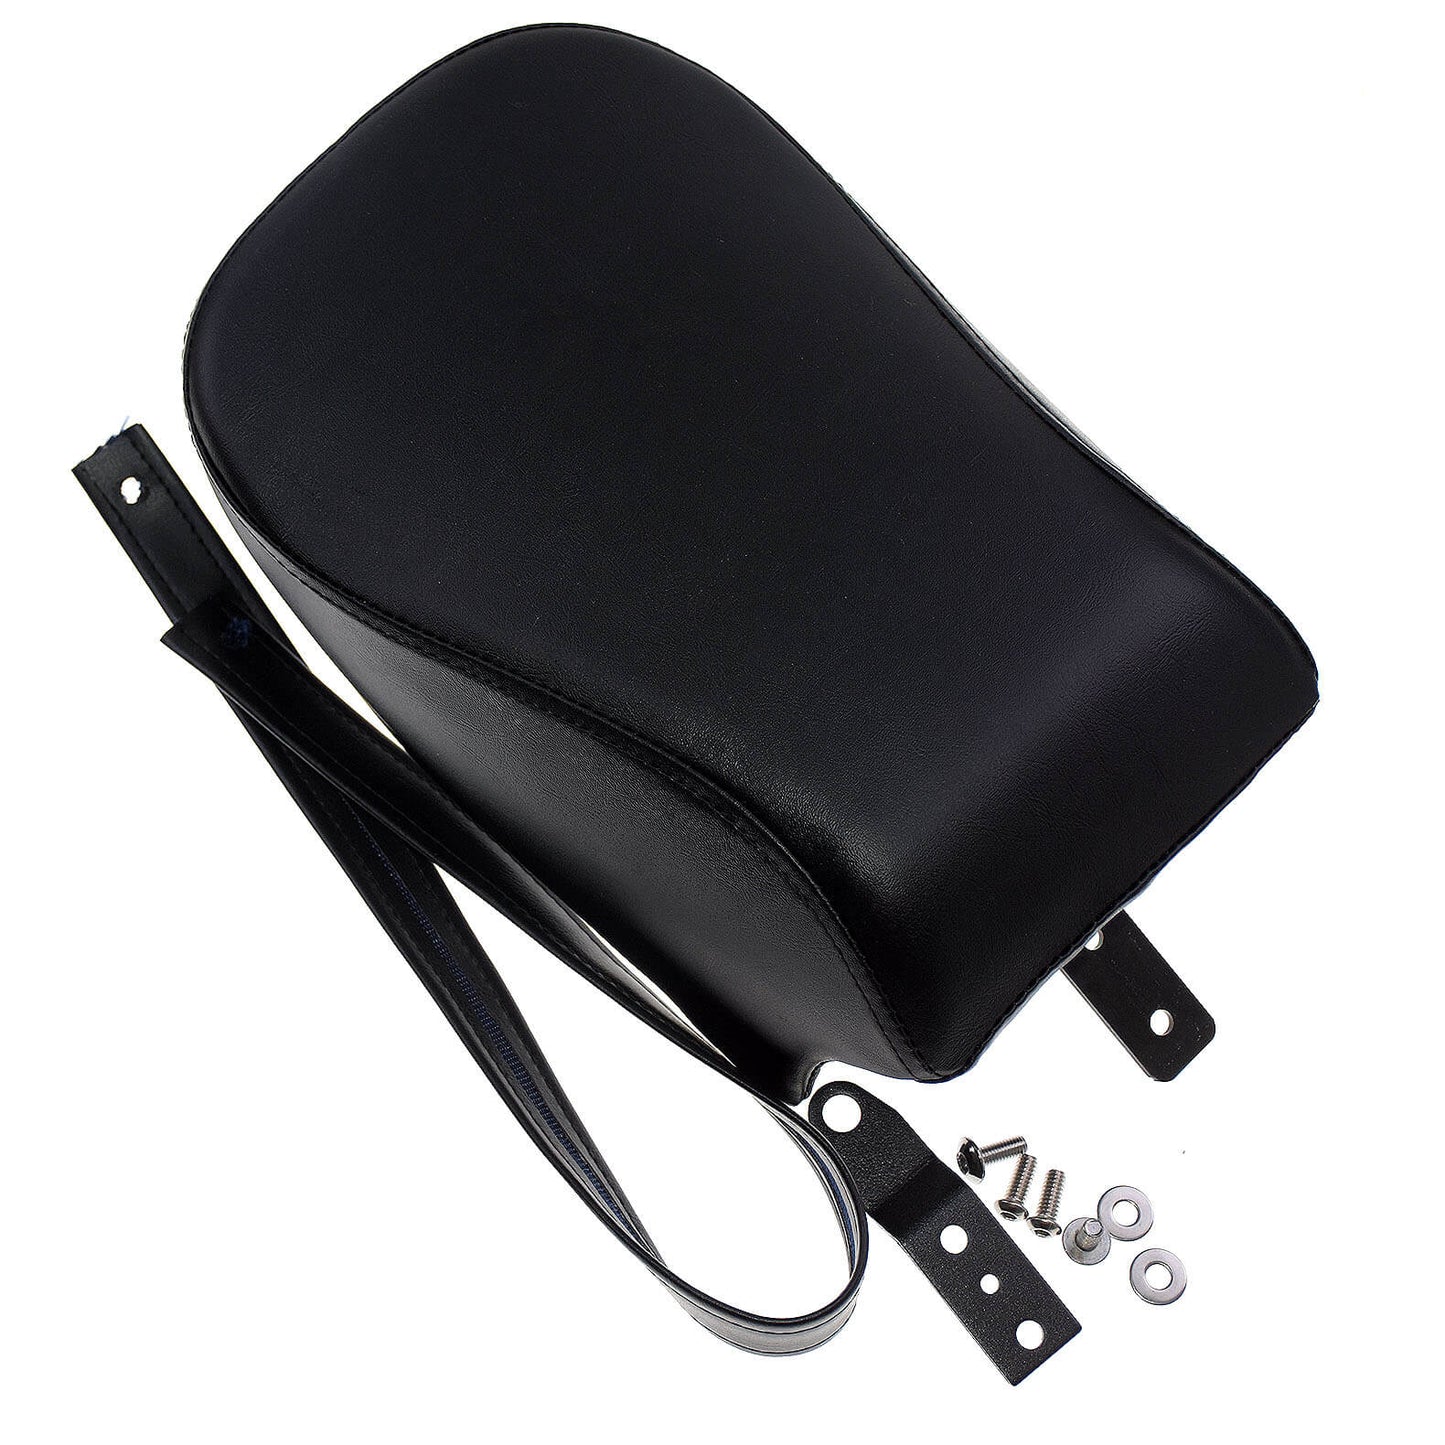 Rear Passenger Pad Seat Cushion Black Fit For Sportster Iron 883 2016-2017 | Mactions